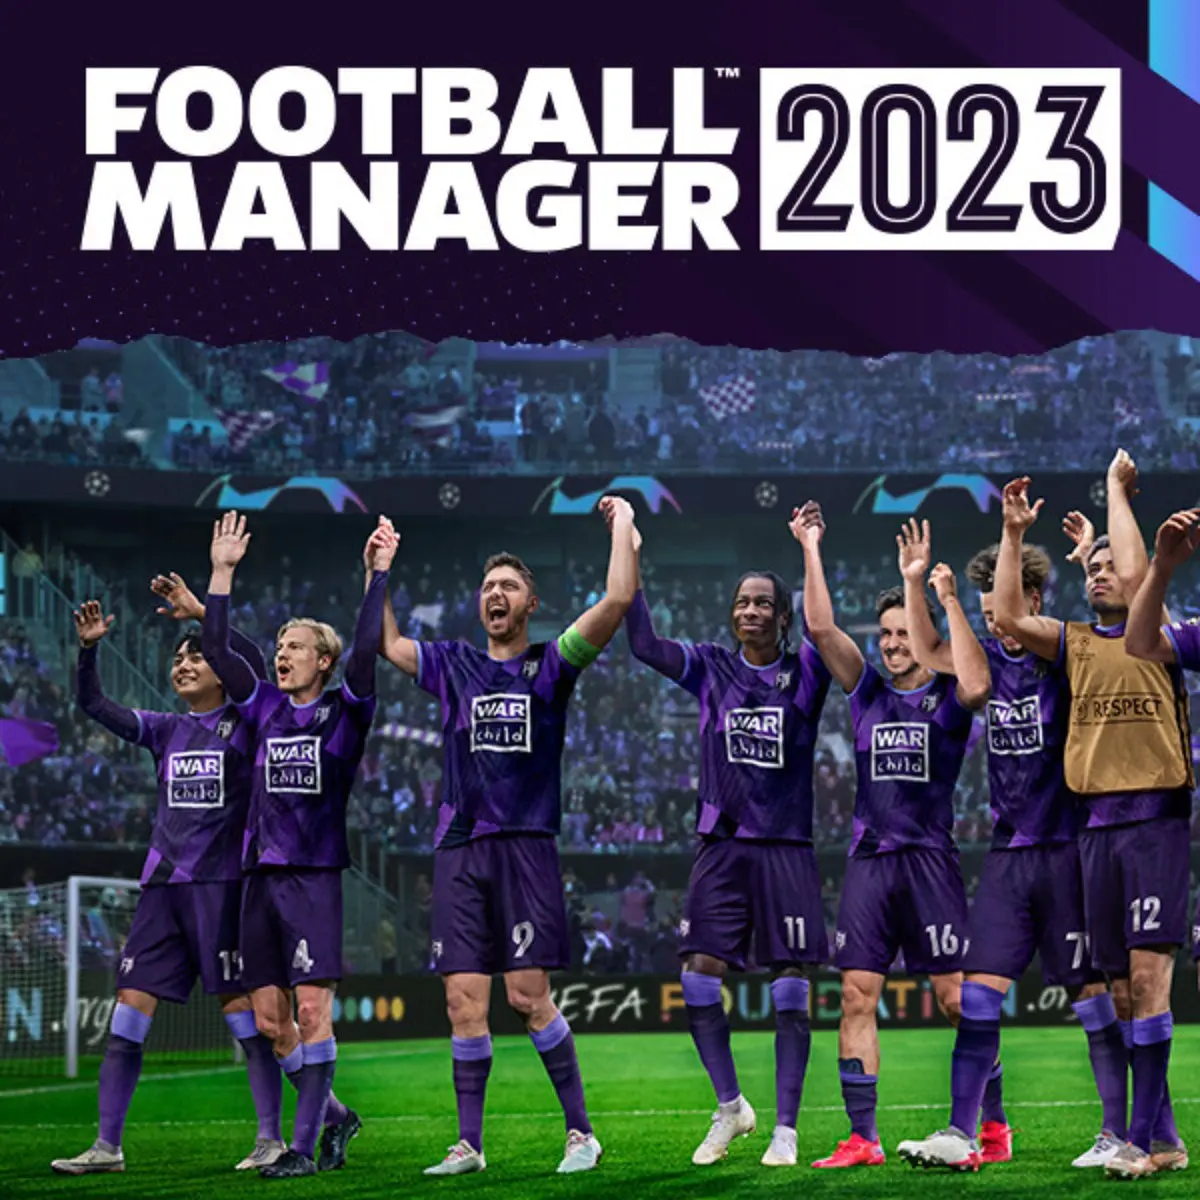 ⚽️ Best Football Manager Soccer Simulator Games and Apps